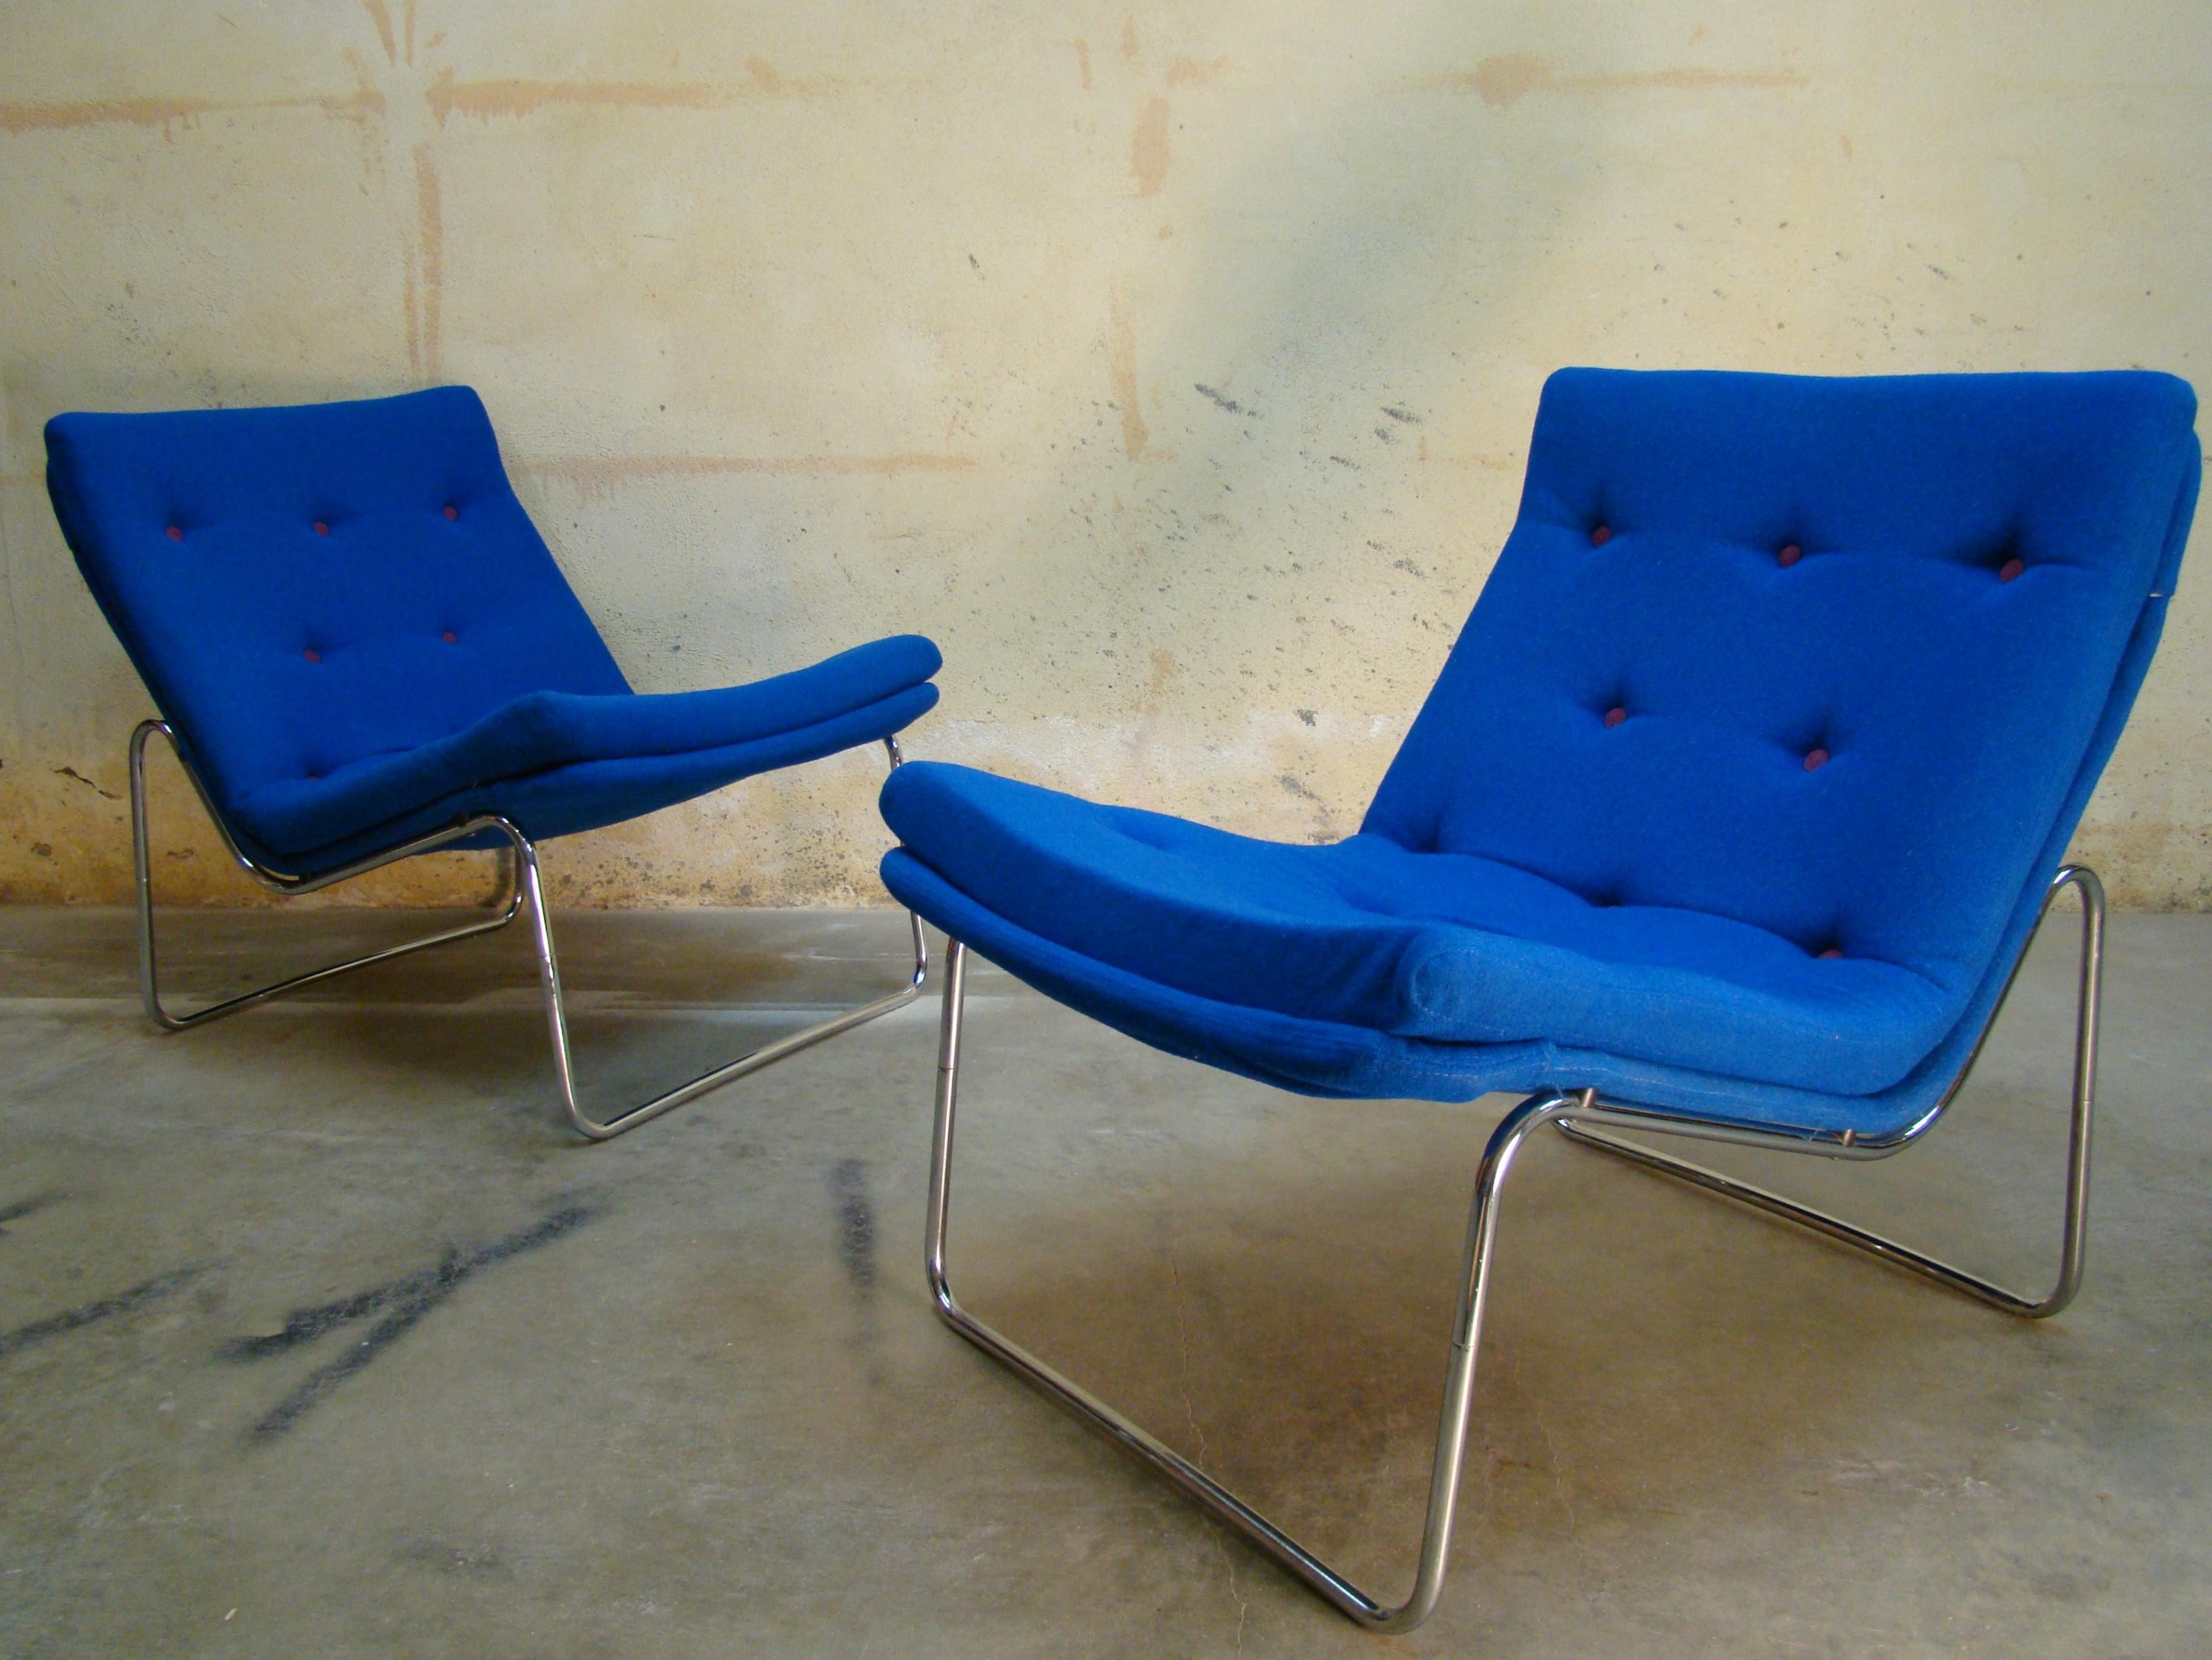 Excellent pair of armless Danish lounge chairs constructed of beautifully contoured tubular chrome steel with 